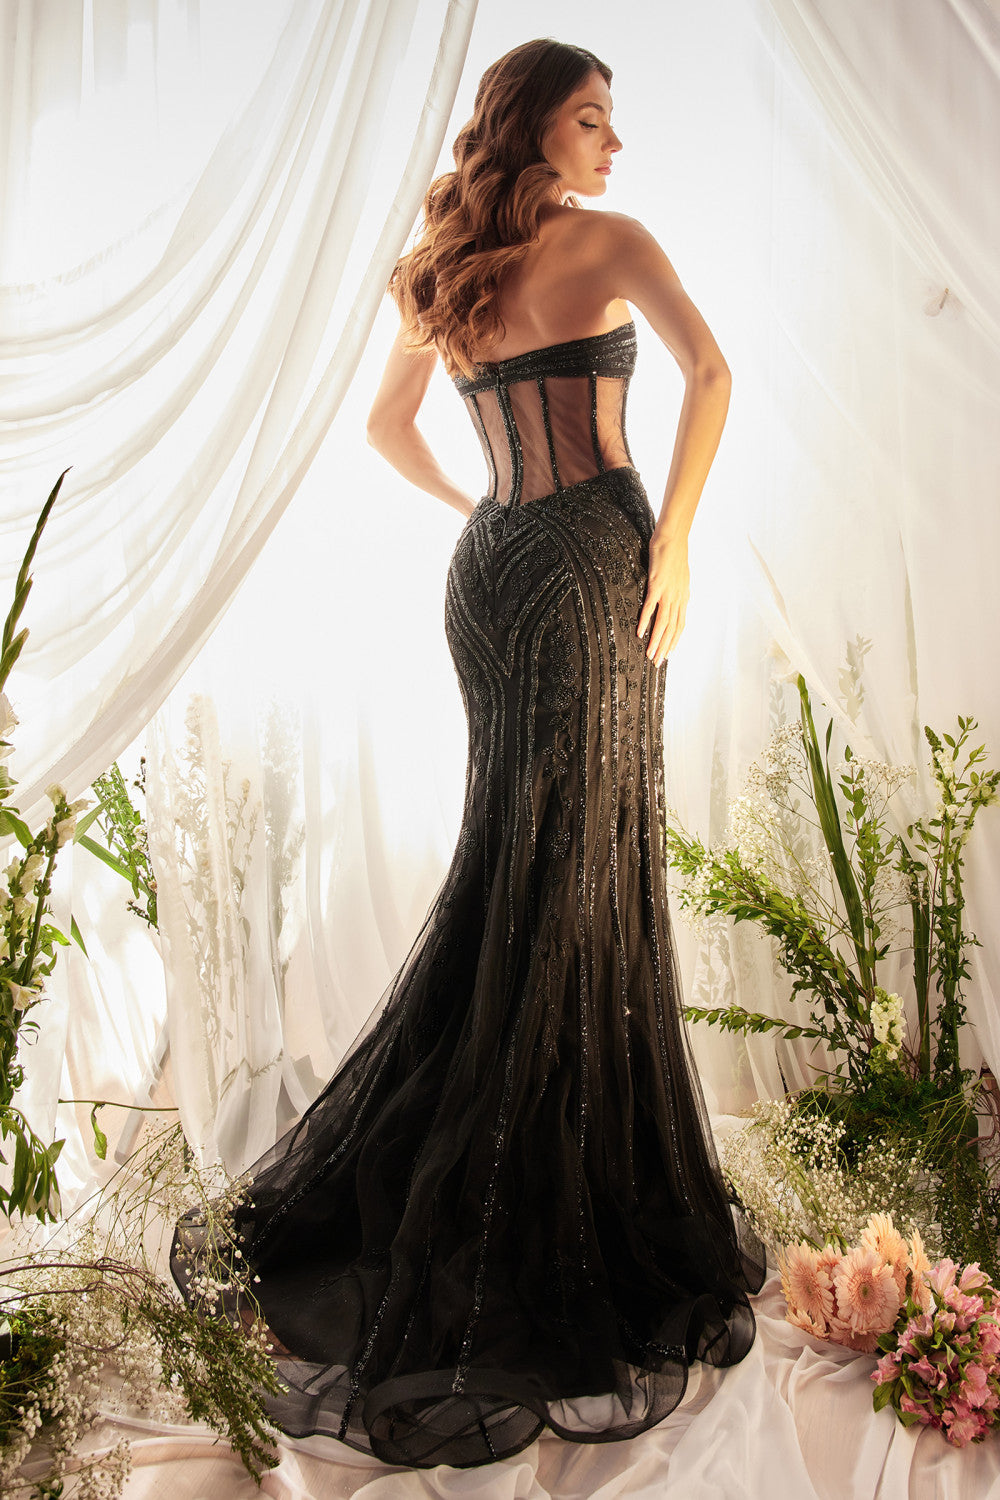 Black Strapless Crystal Lace Mermaid Gown A1211 - Special Occasion